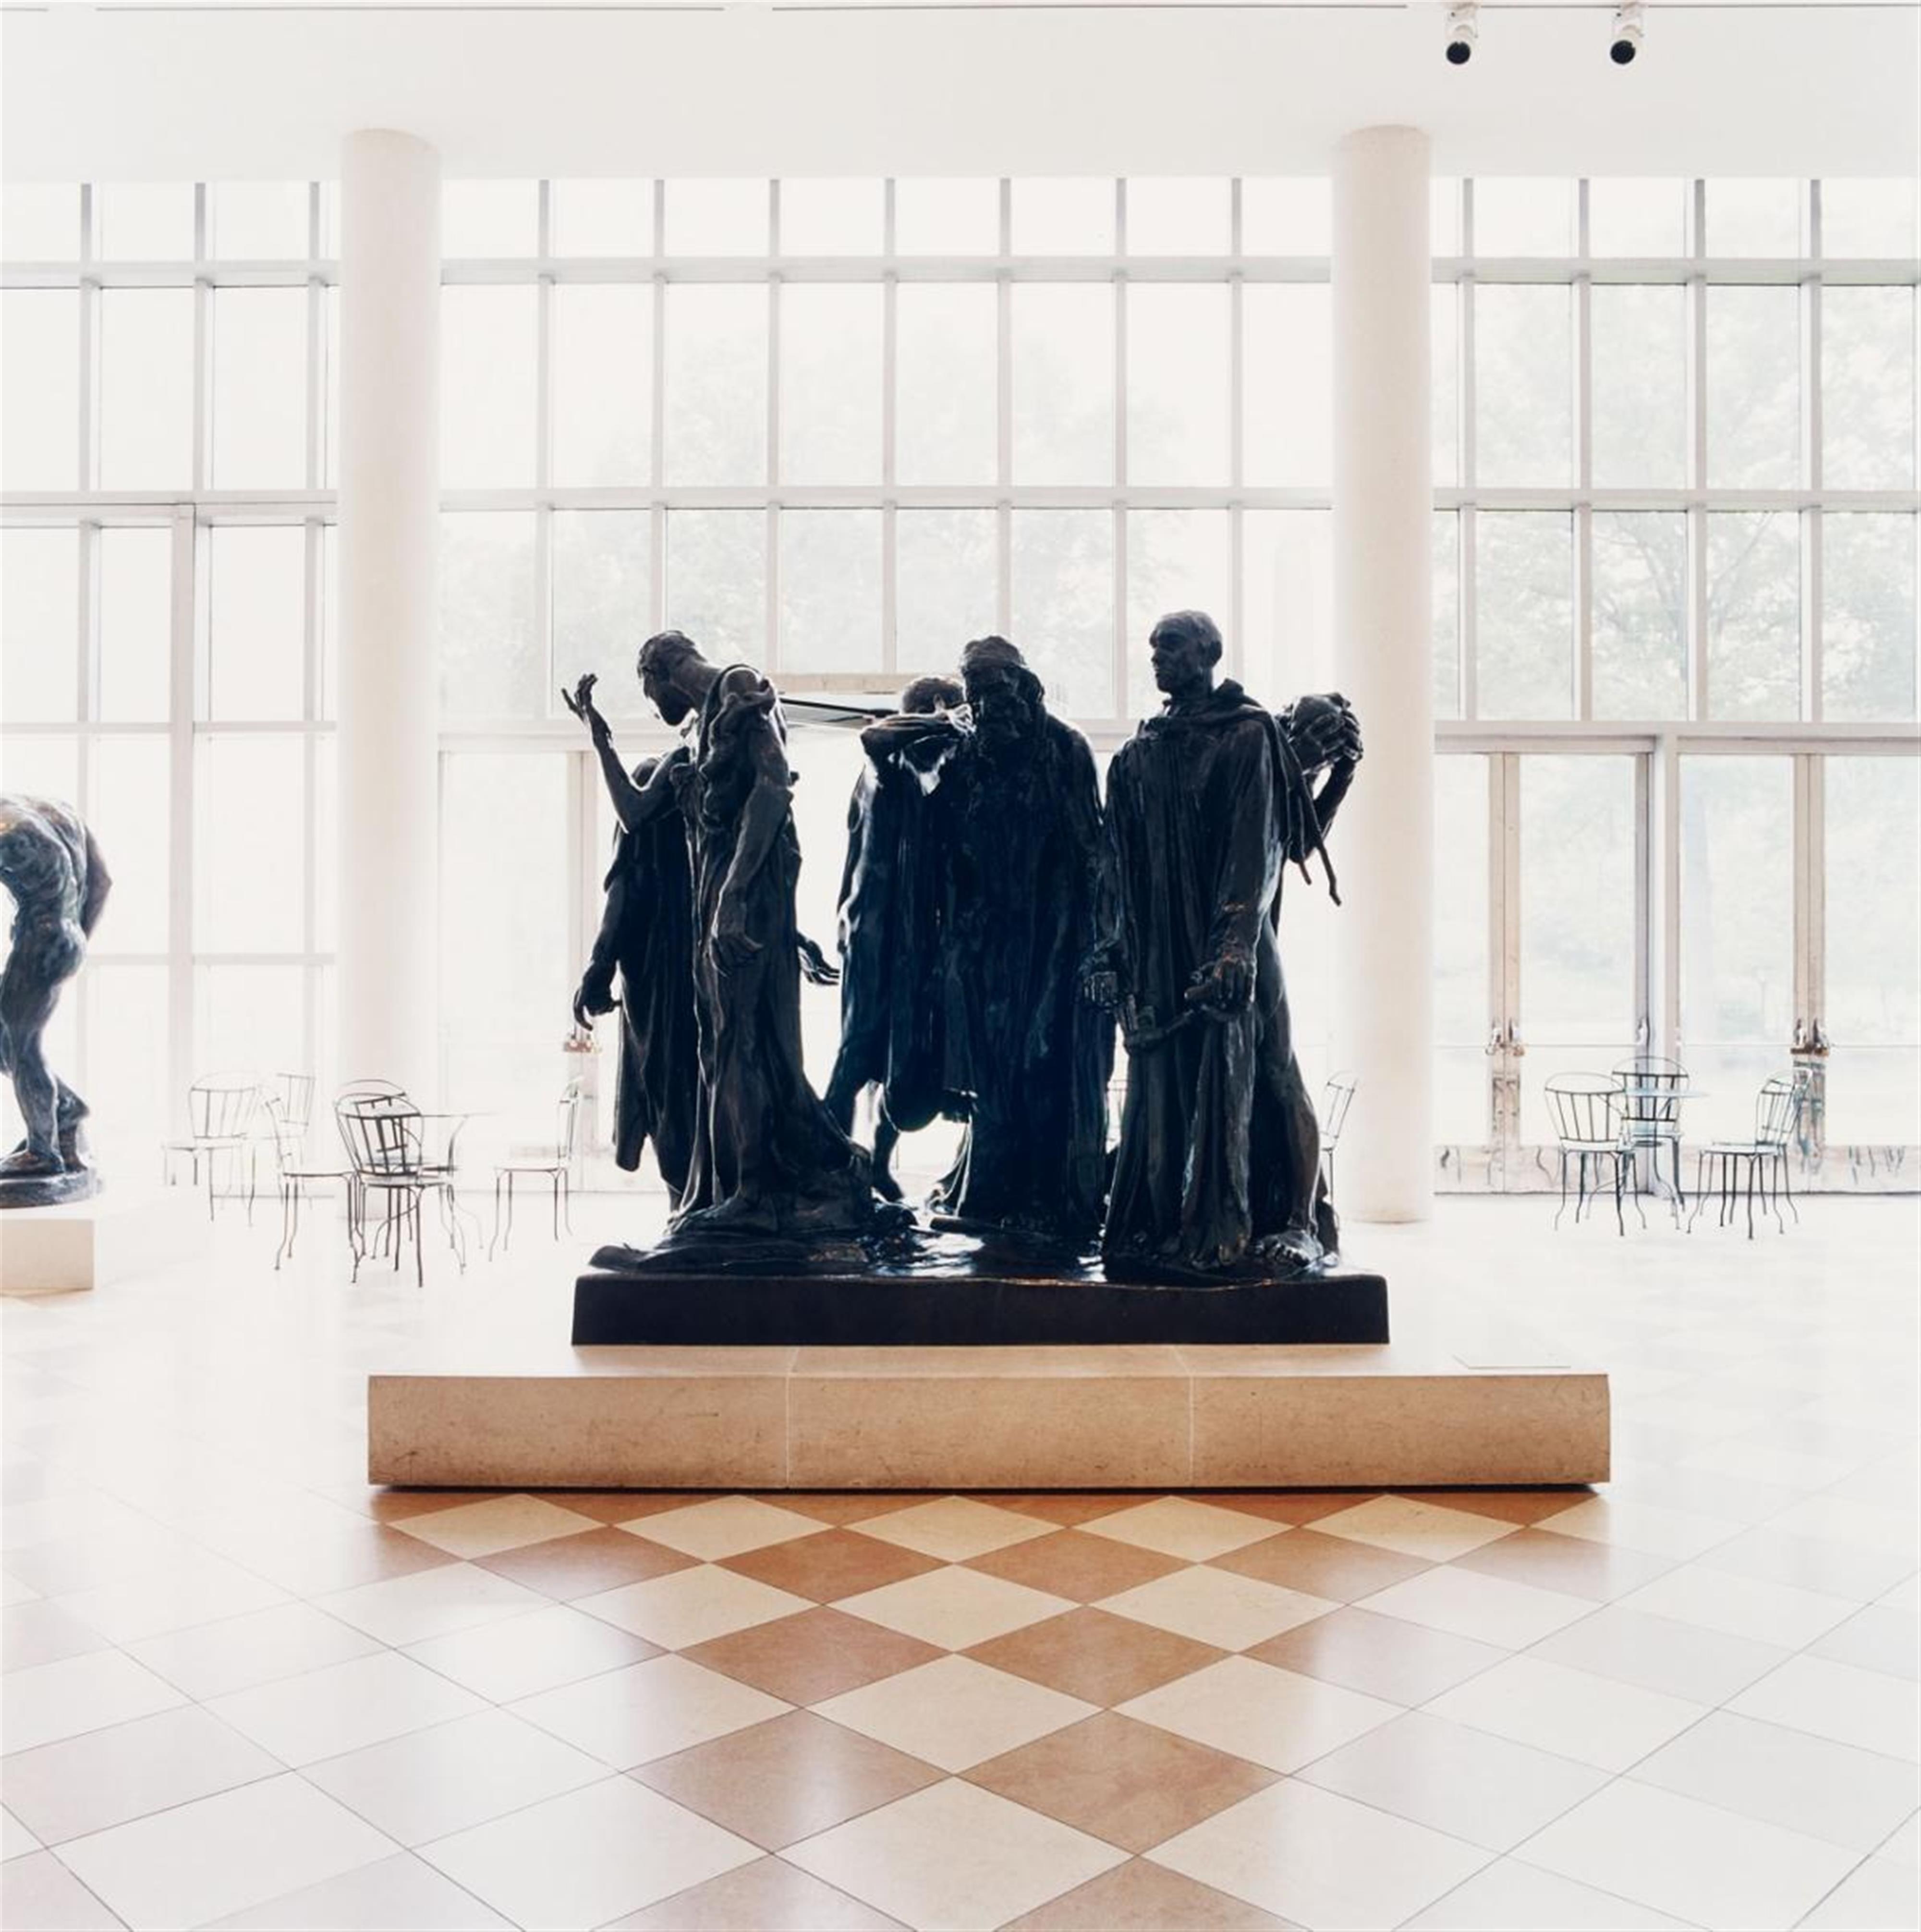 Candida Höfer - The Metropolitan Museum of Art New York (from the series: Burghers of Calais) - image-1